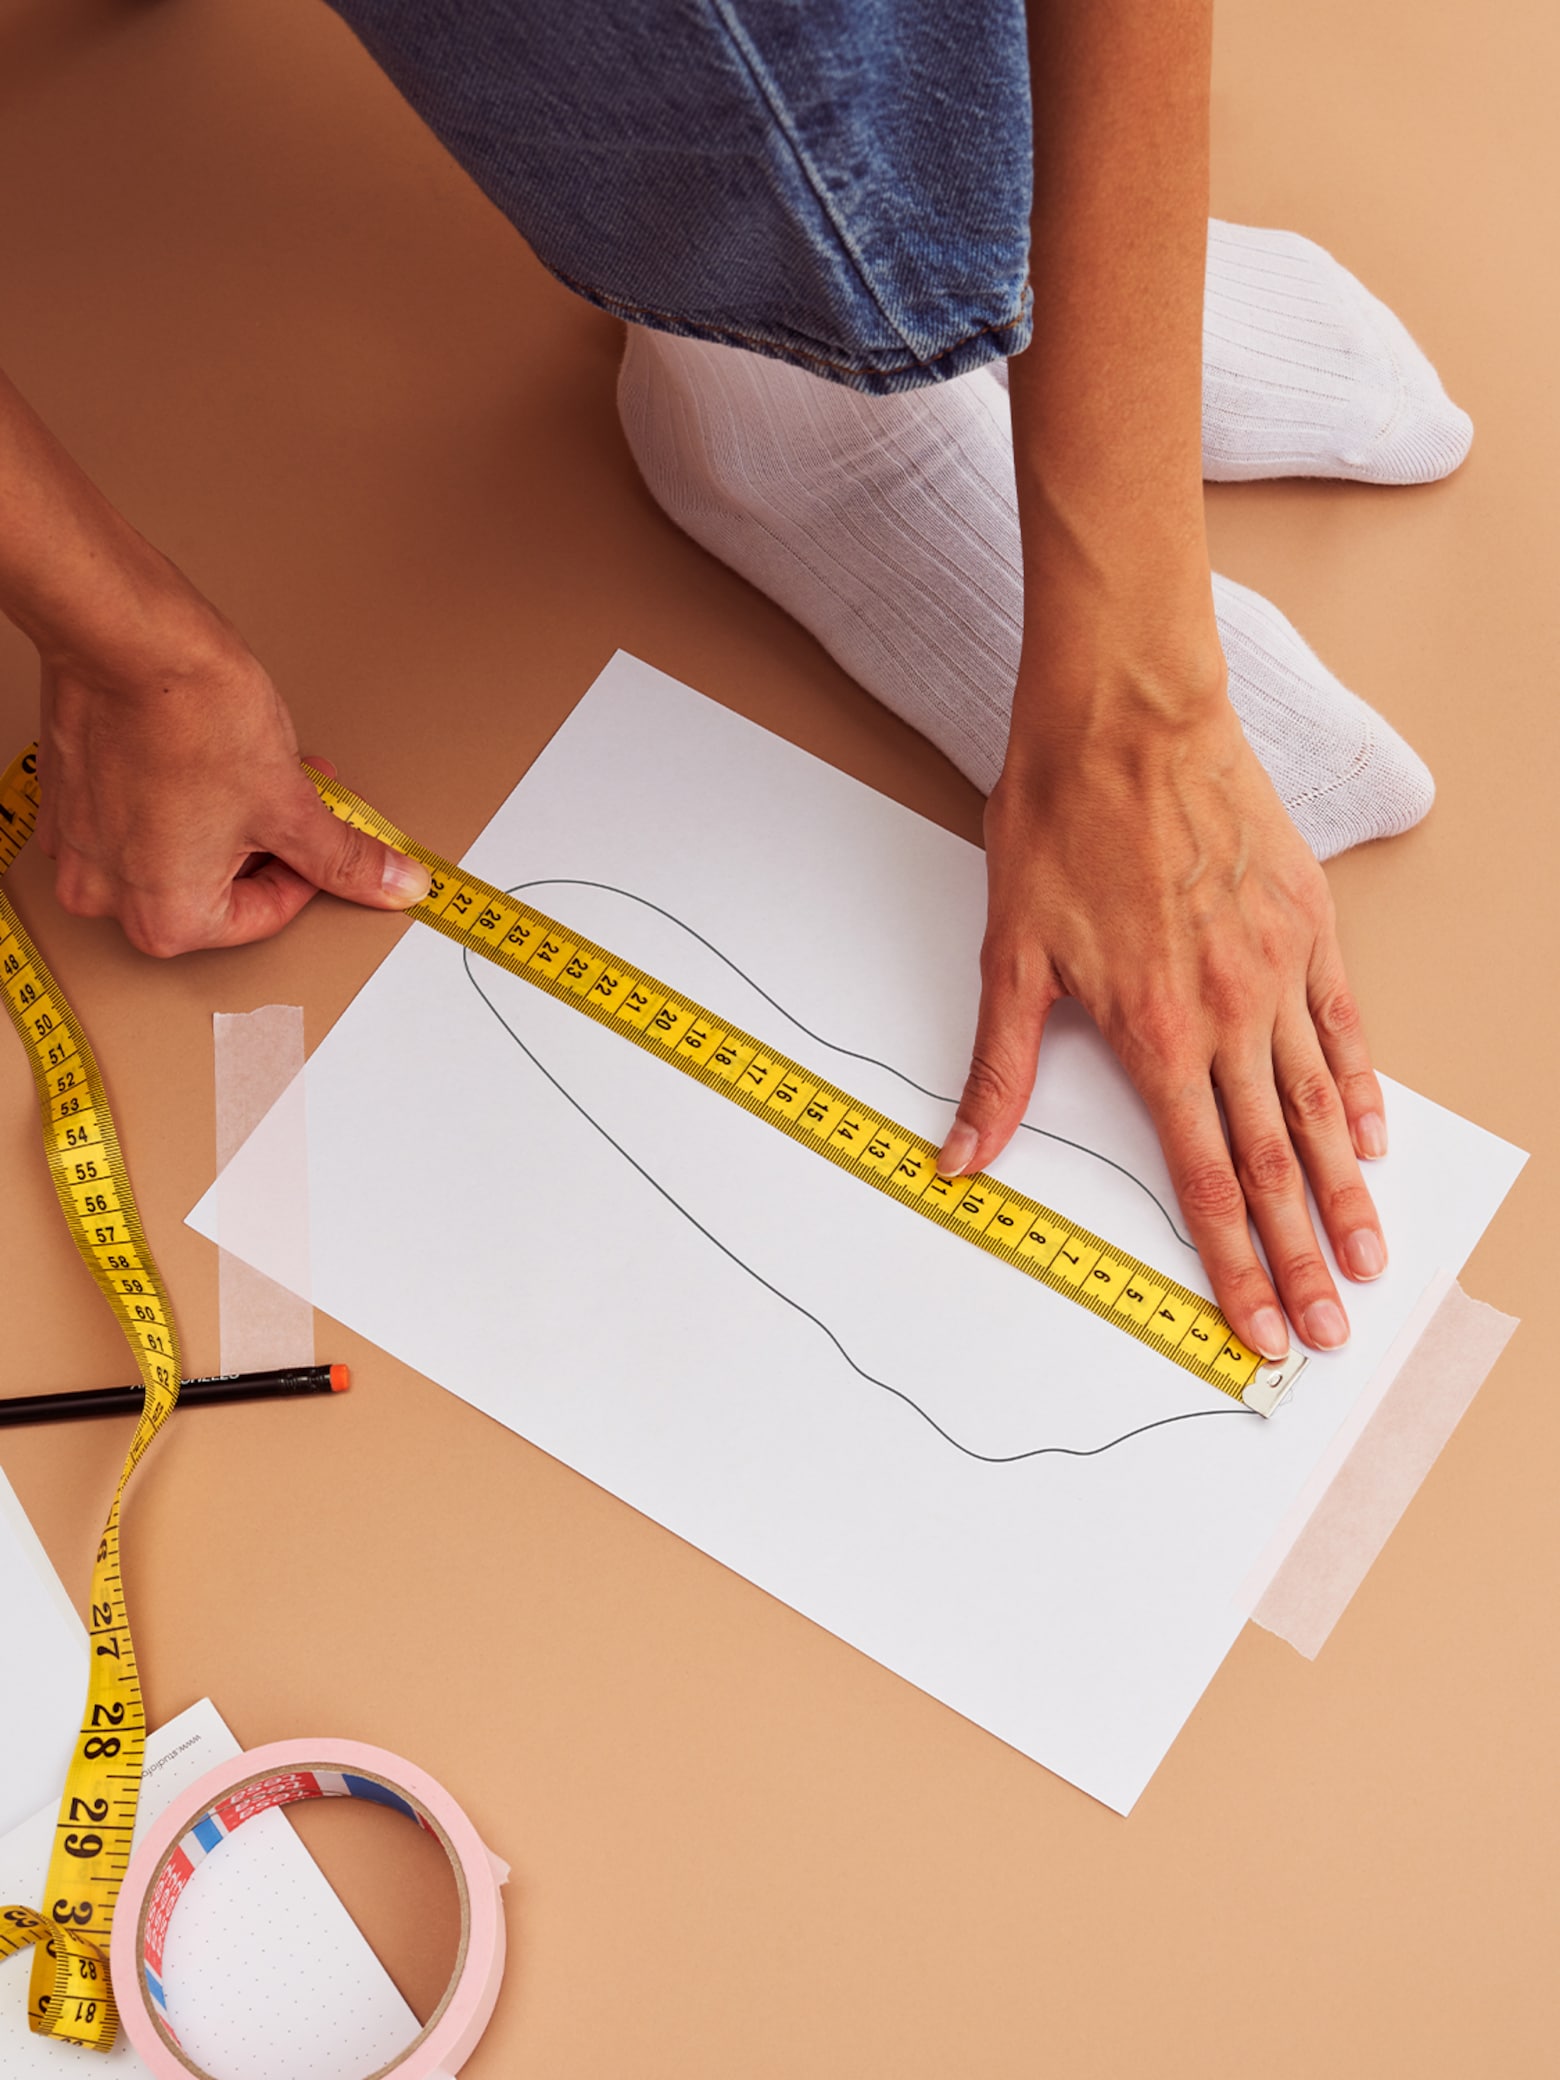 How to measure at home Shoe sizing guide